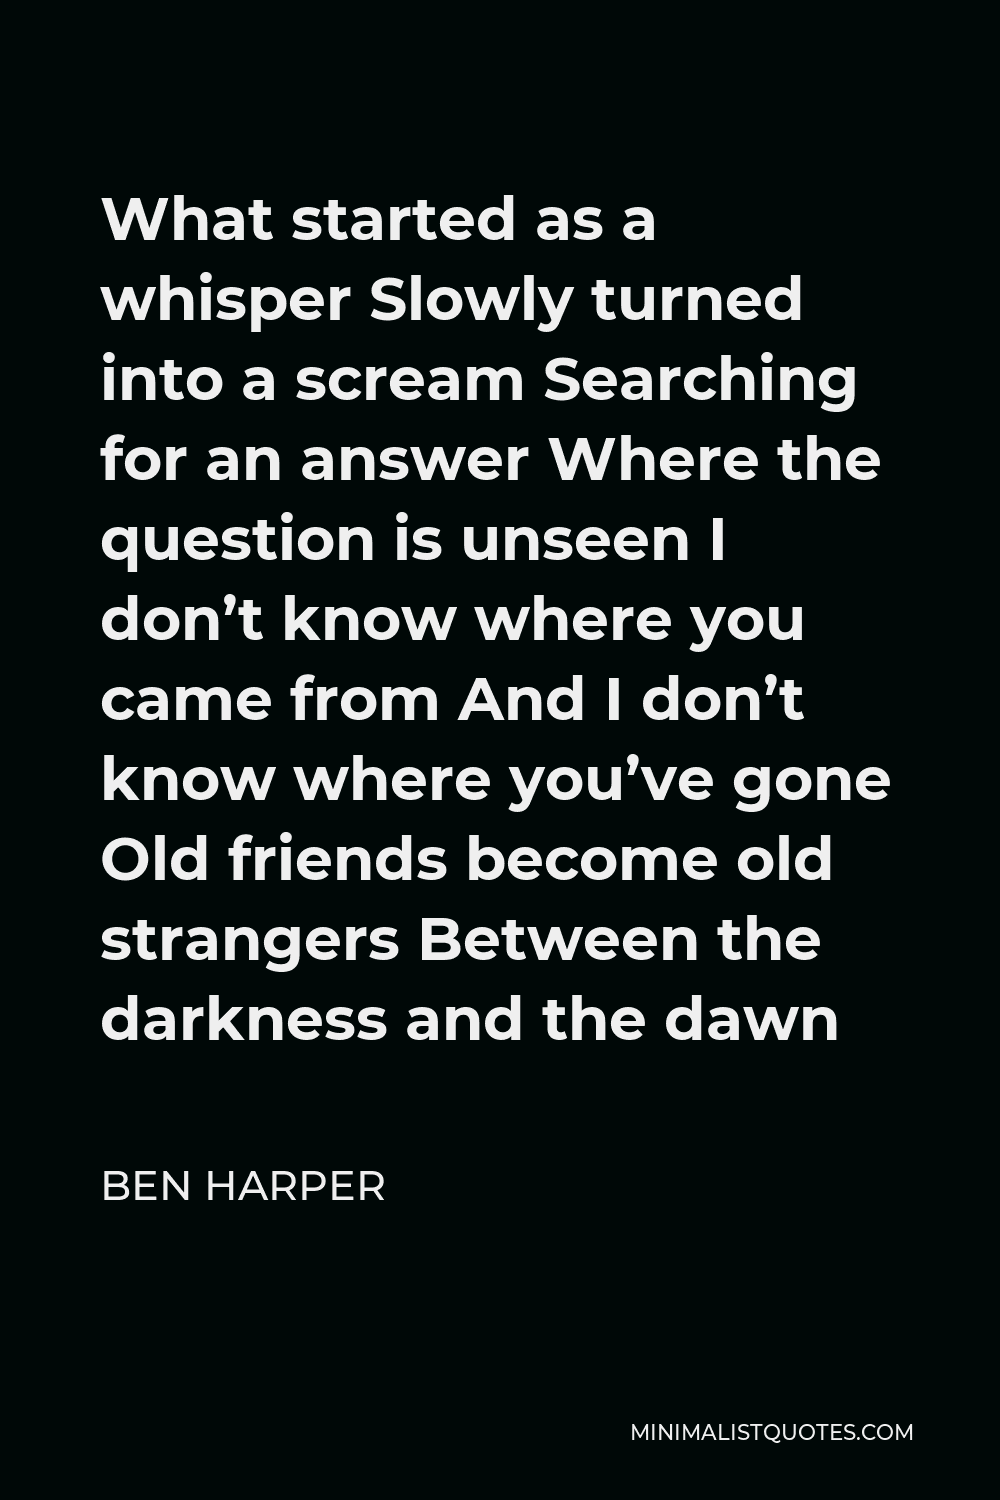 Ben Harper Quote - What started as a whisper Slowly turned into a scream Searching for an answer Where the question is unseen I don’t know where you came from And I don’t know where you’ve gone Old friends become old strangers Between the darkness and the dawn